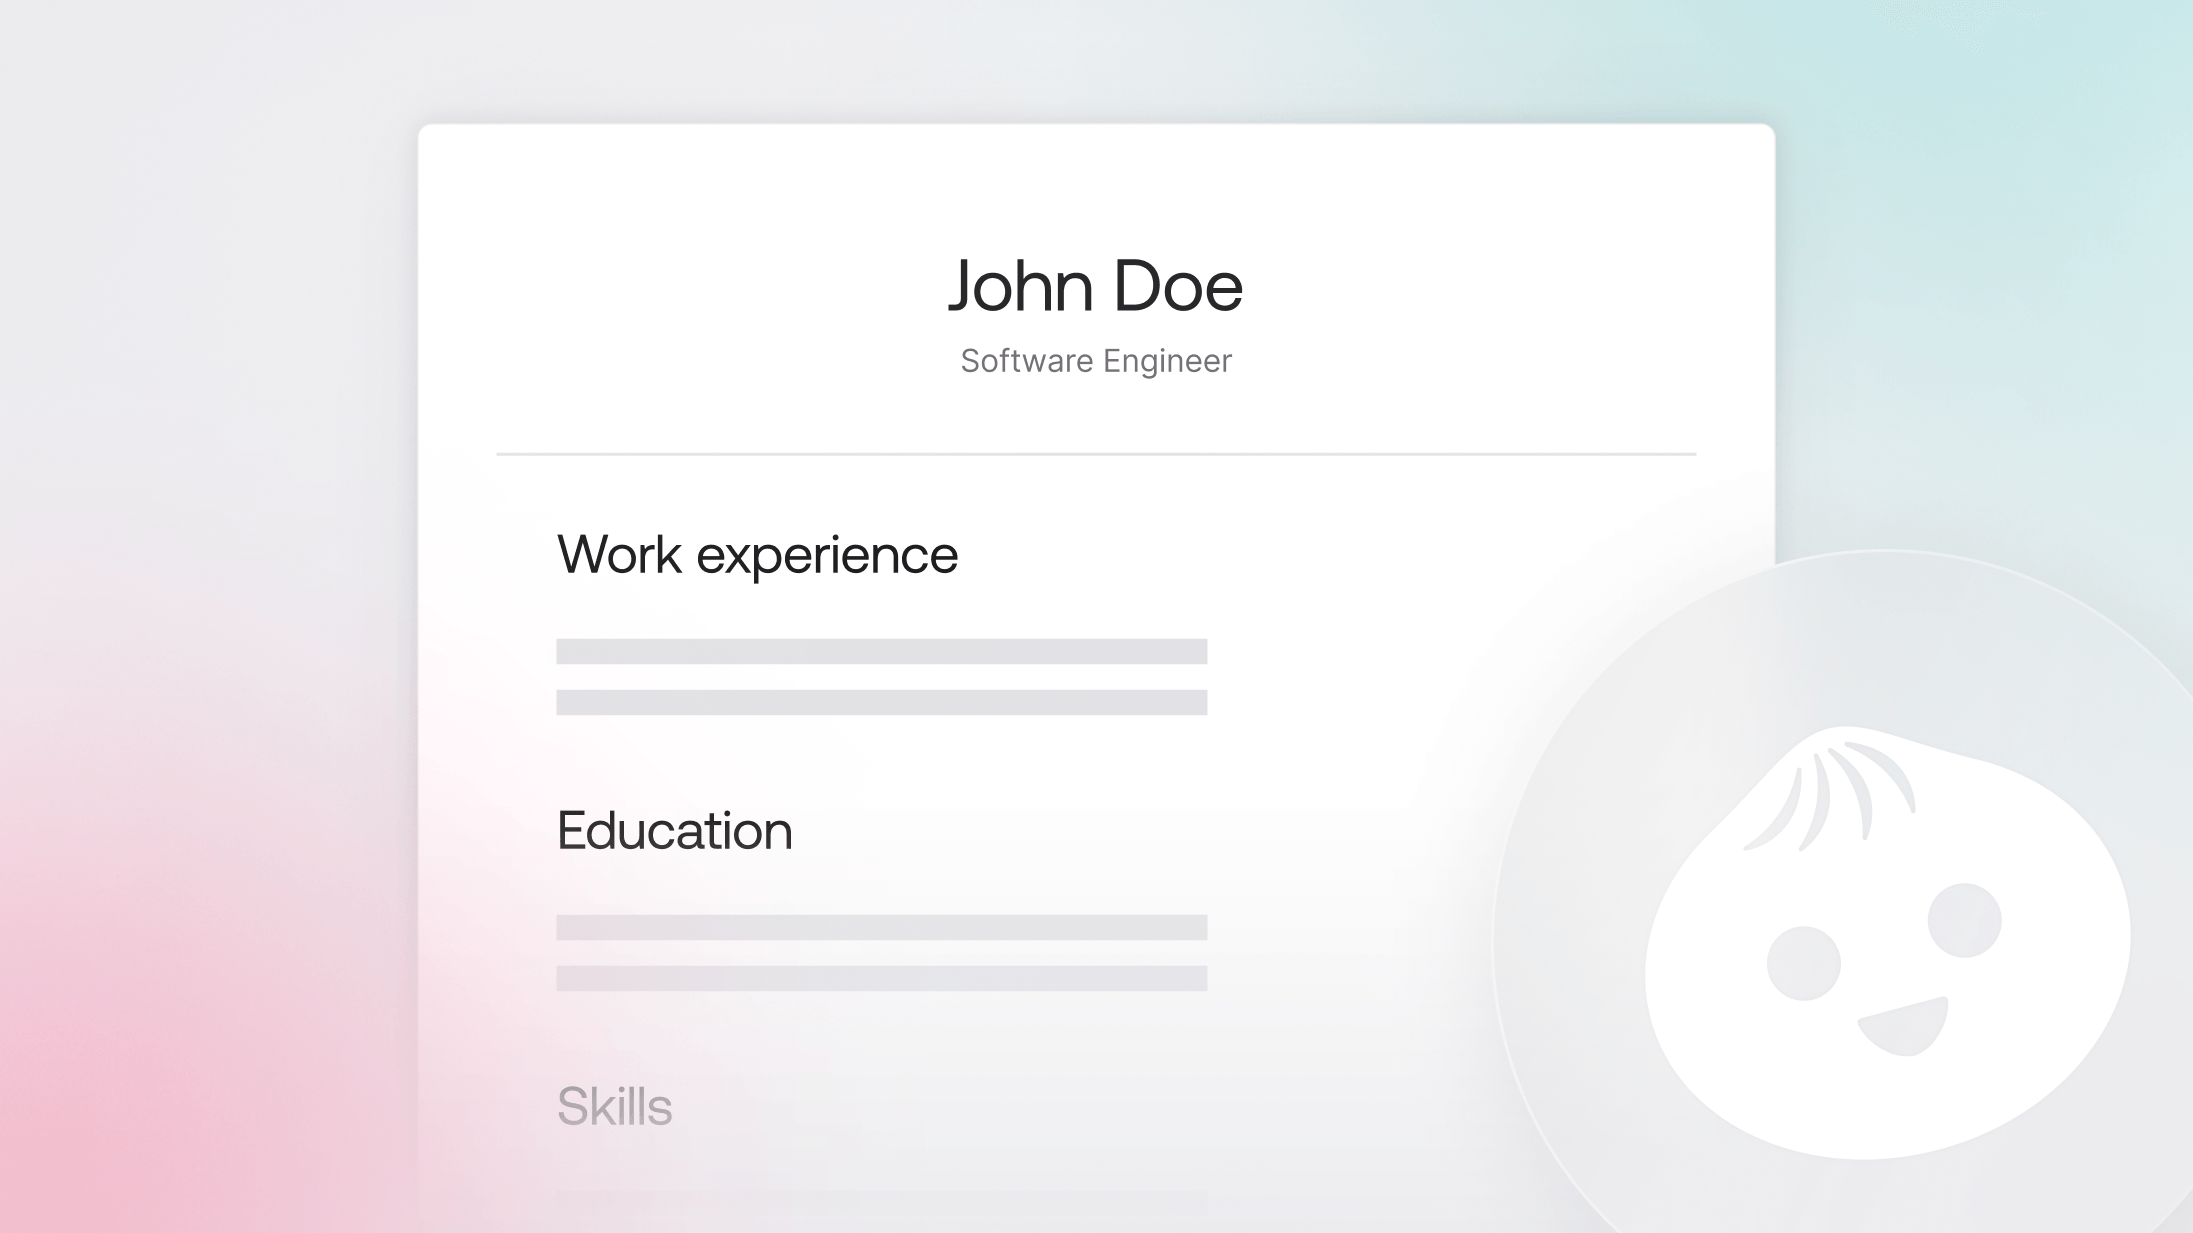 Share your resume using Appwrite Functions